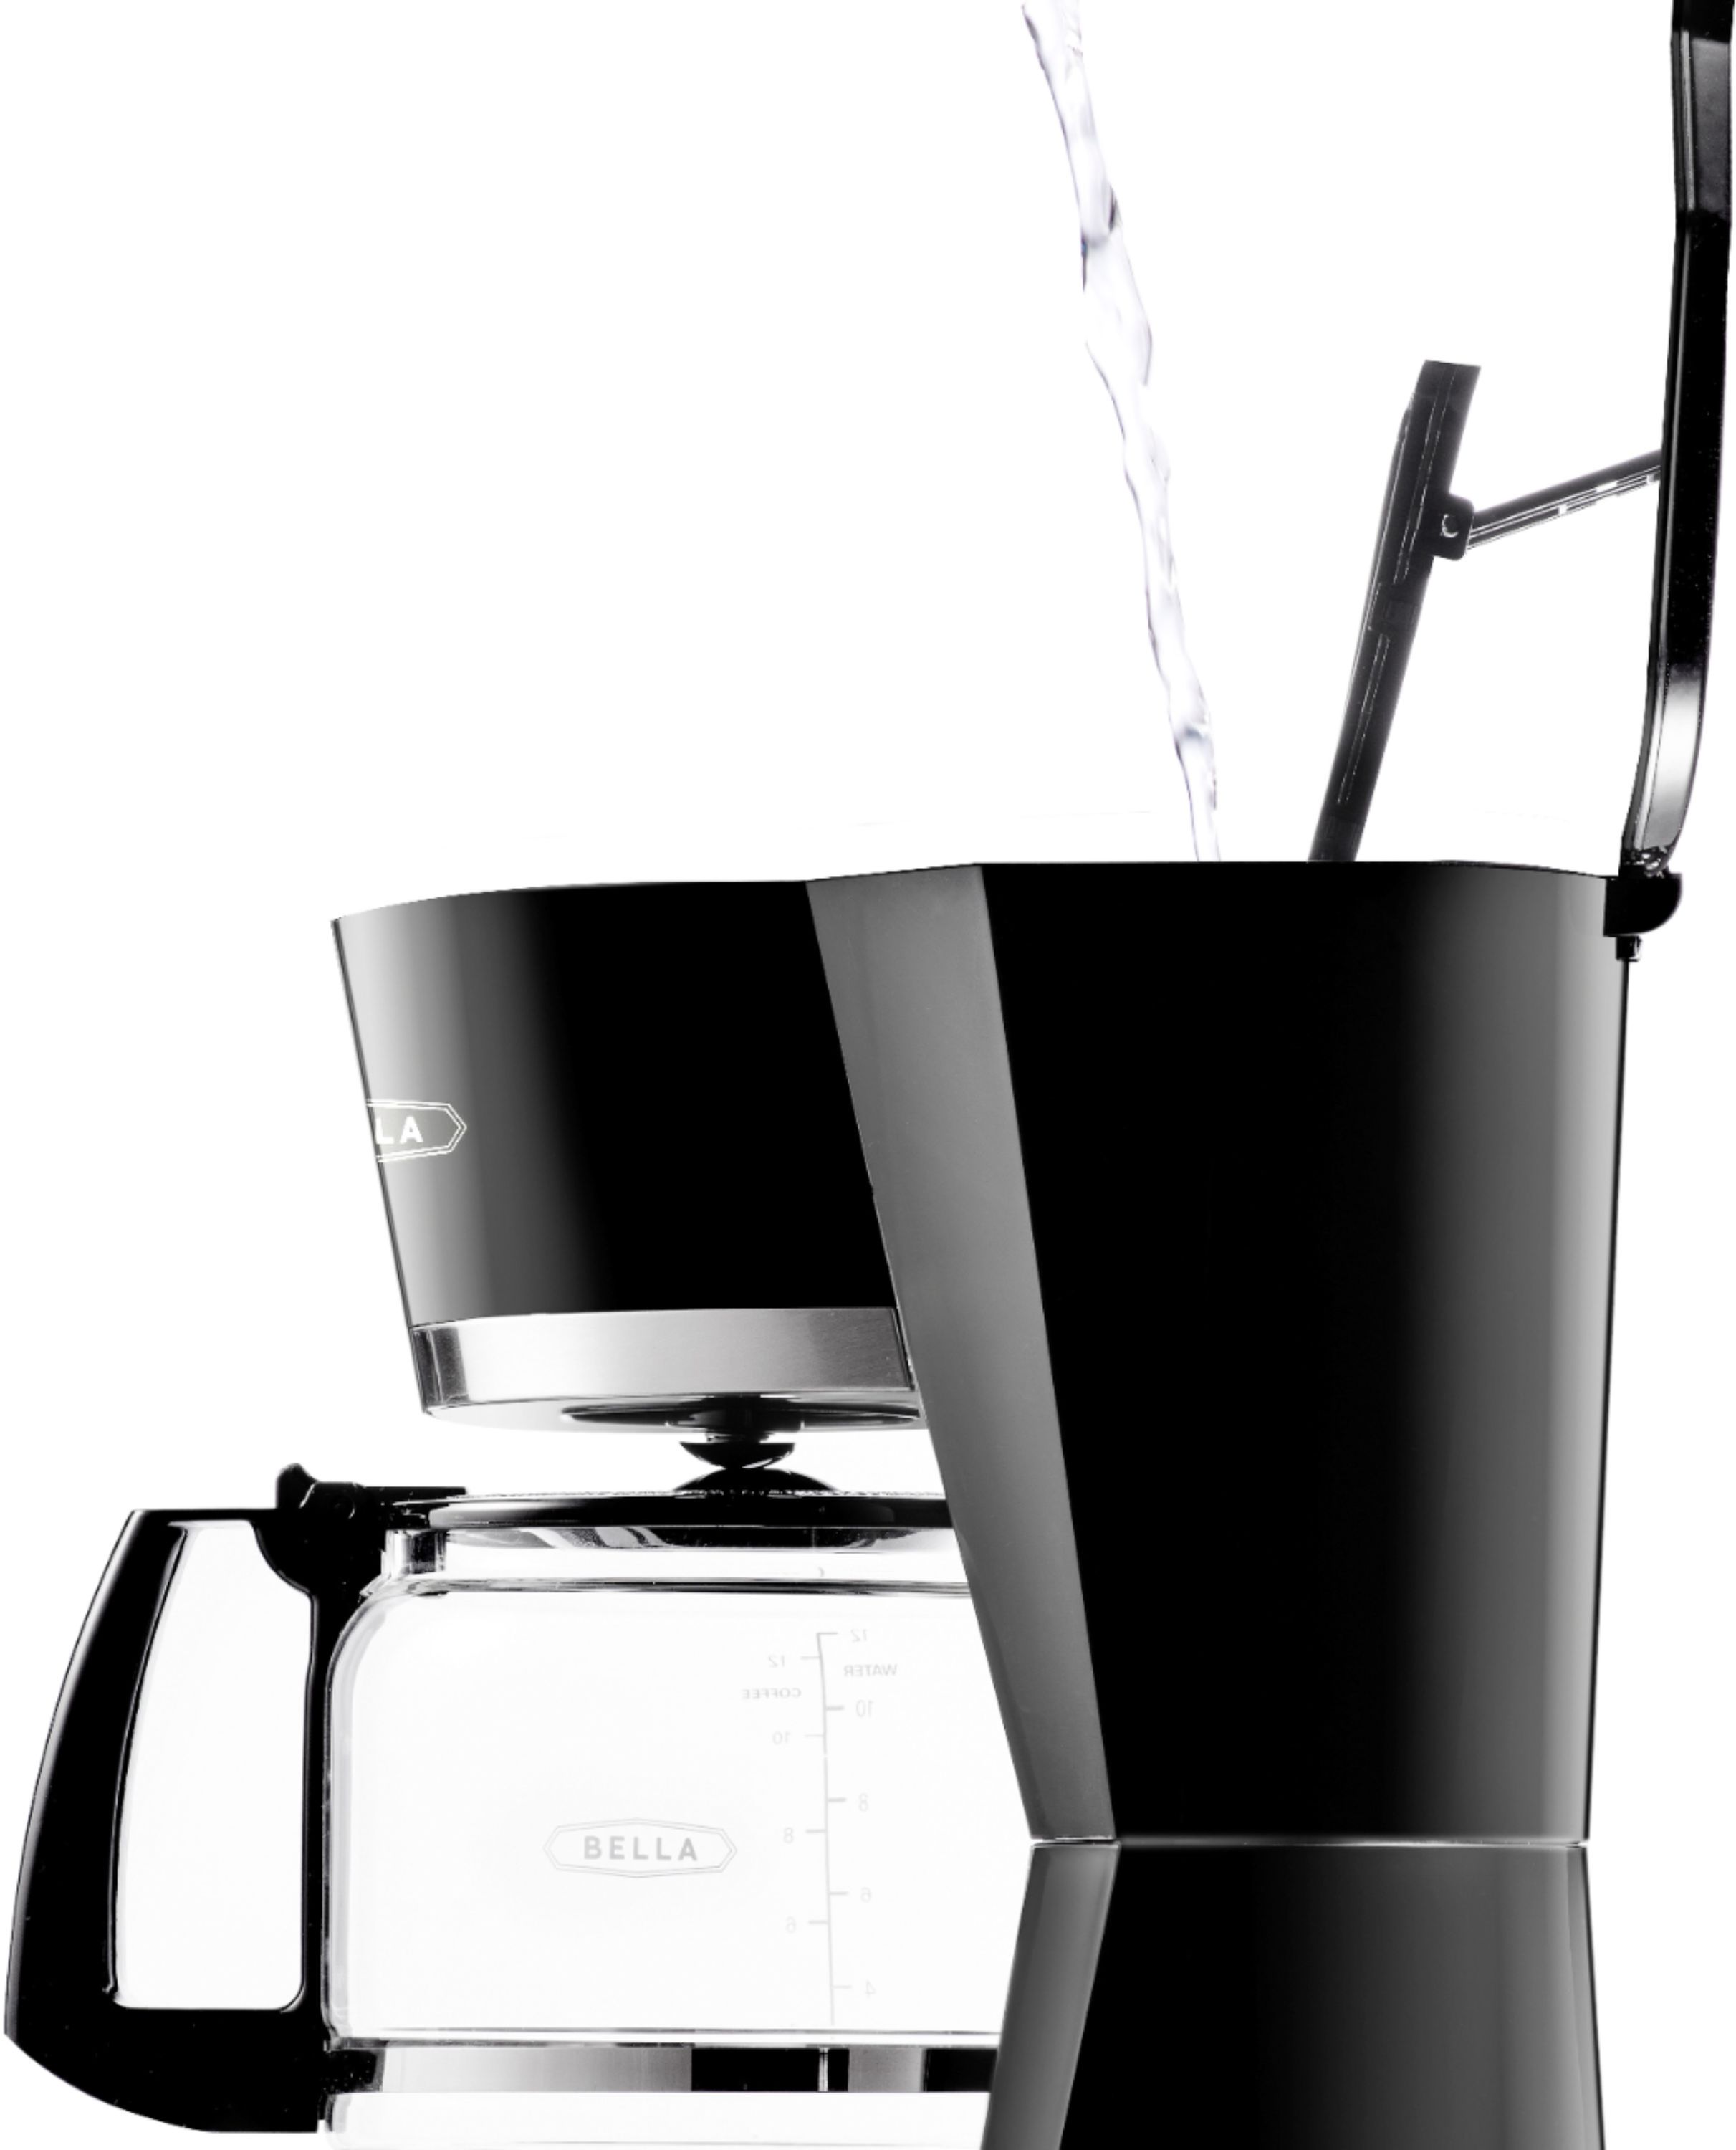 Bella Linea Collection 12 Cup Coffee Maker 